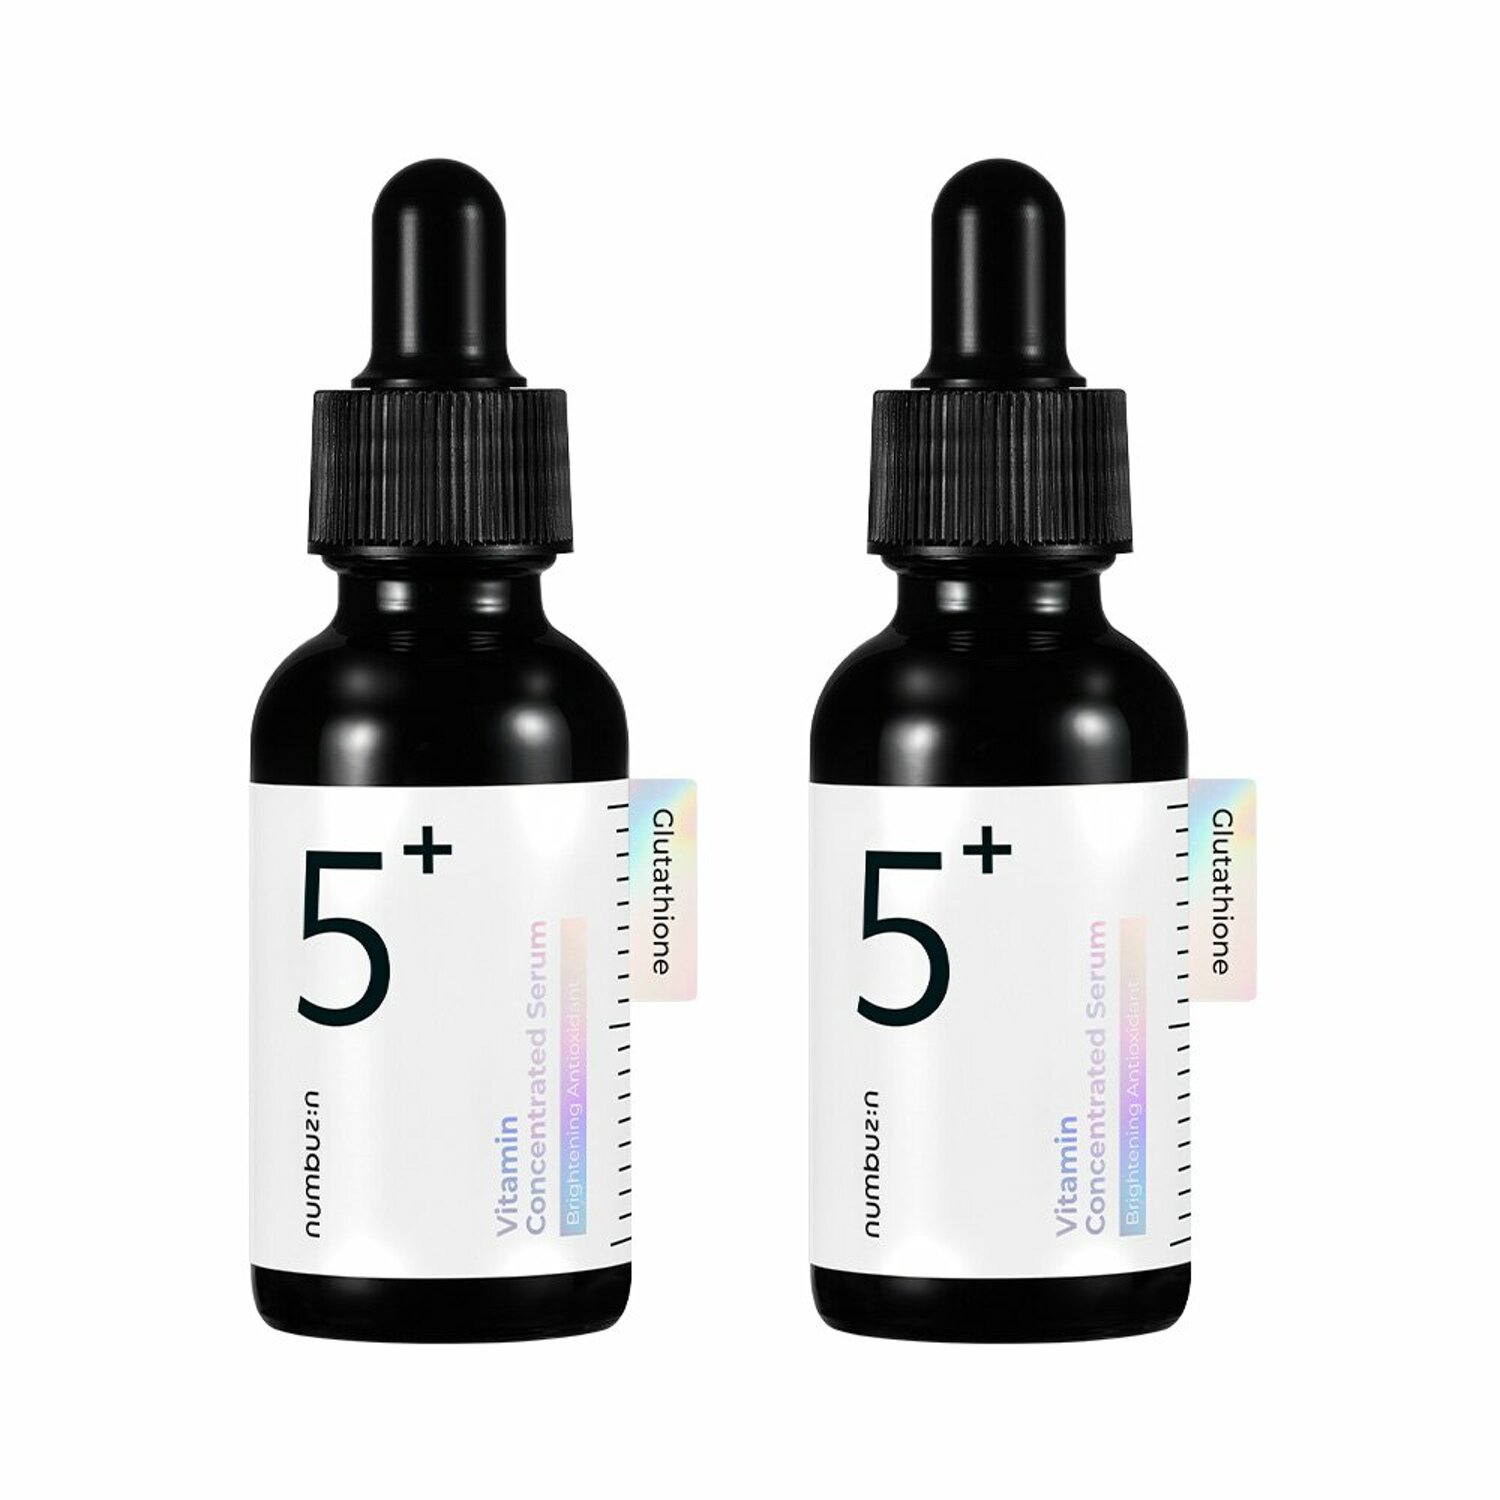 numbuzin No. 5 Vitamin Concentrated Serum 30mL+30mL Duo Set | OLIVE YOUNG Global